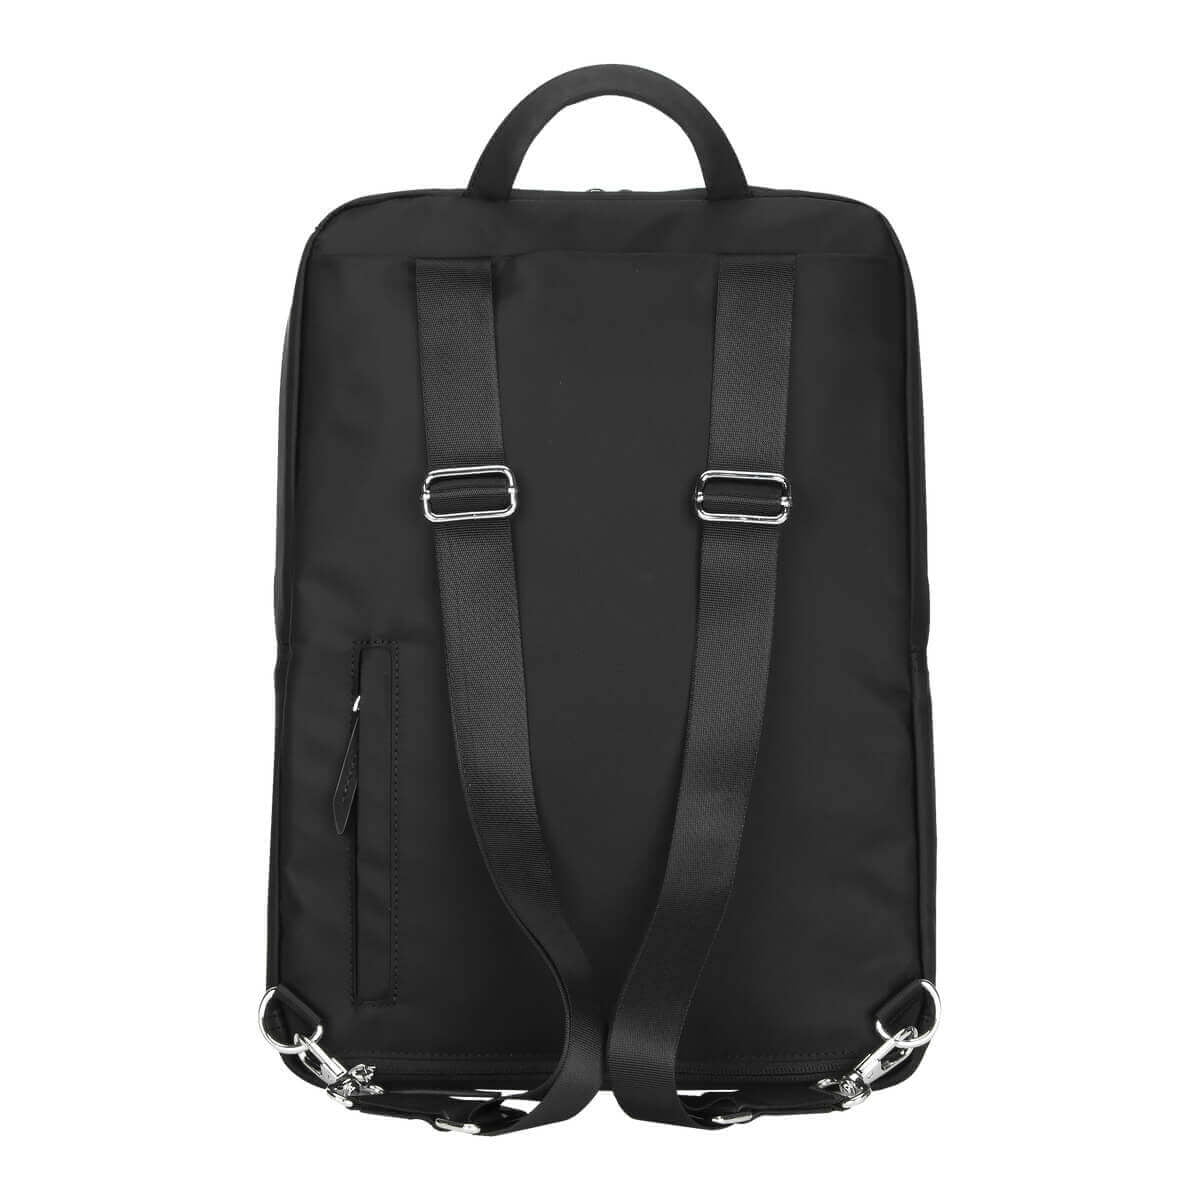 Targus Newport Ultra Slim Backpack Trendy for Travel and Commuter fit up to 15-Inches Laptop TBB598GL Black 